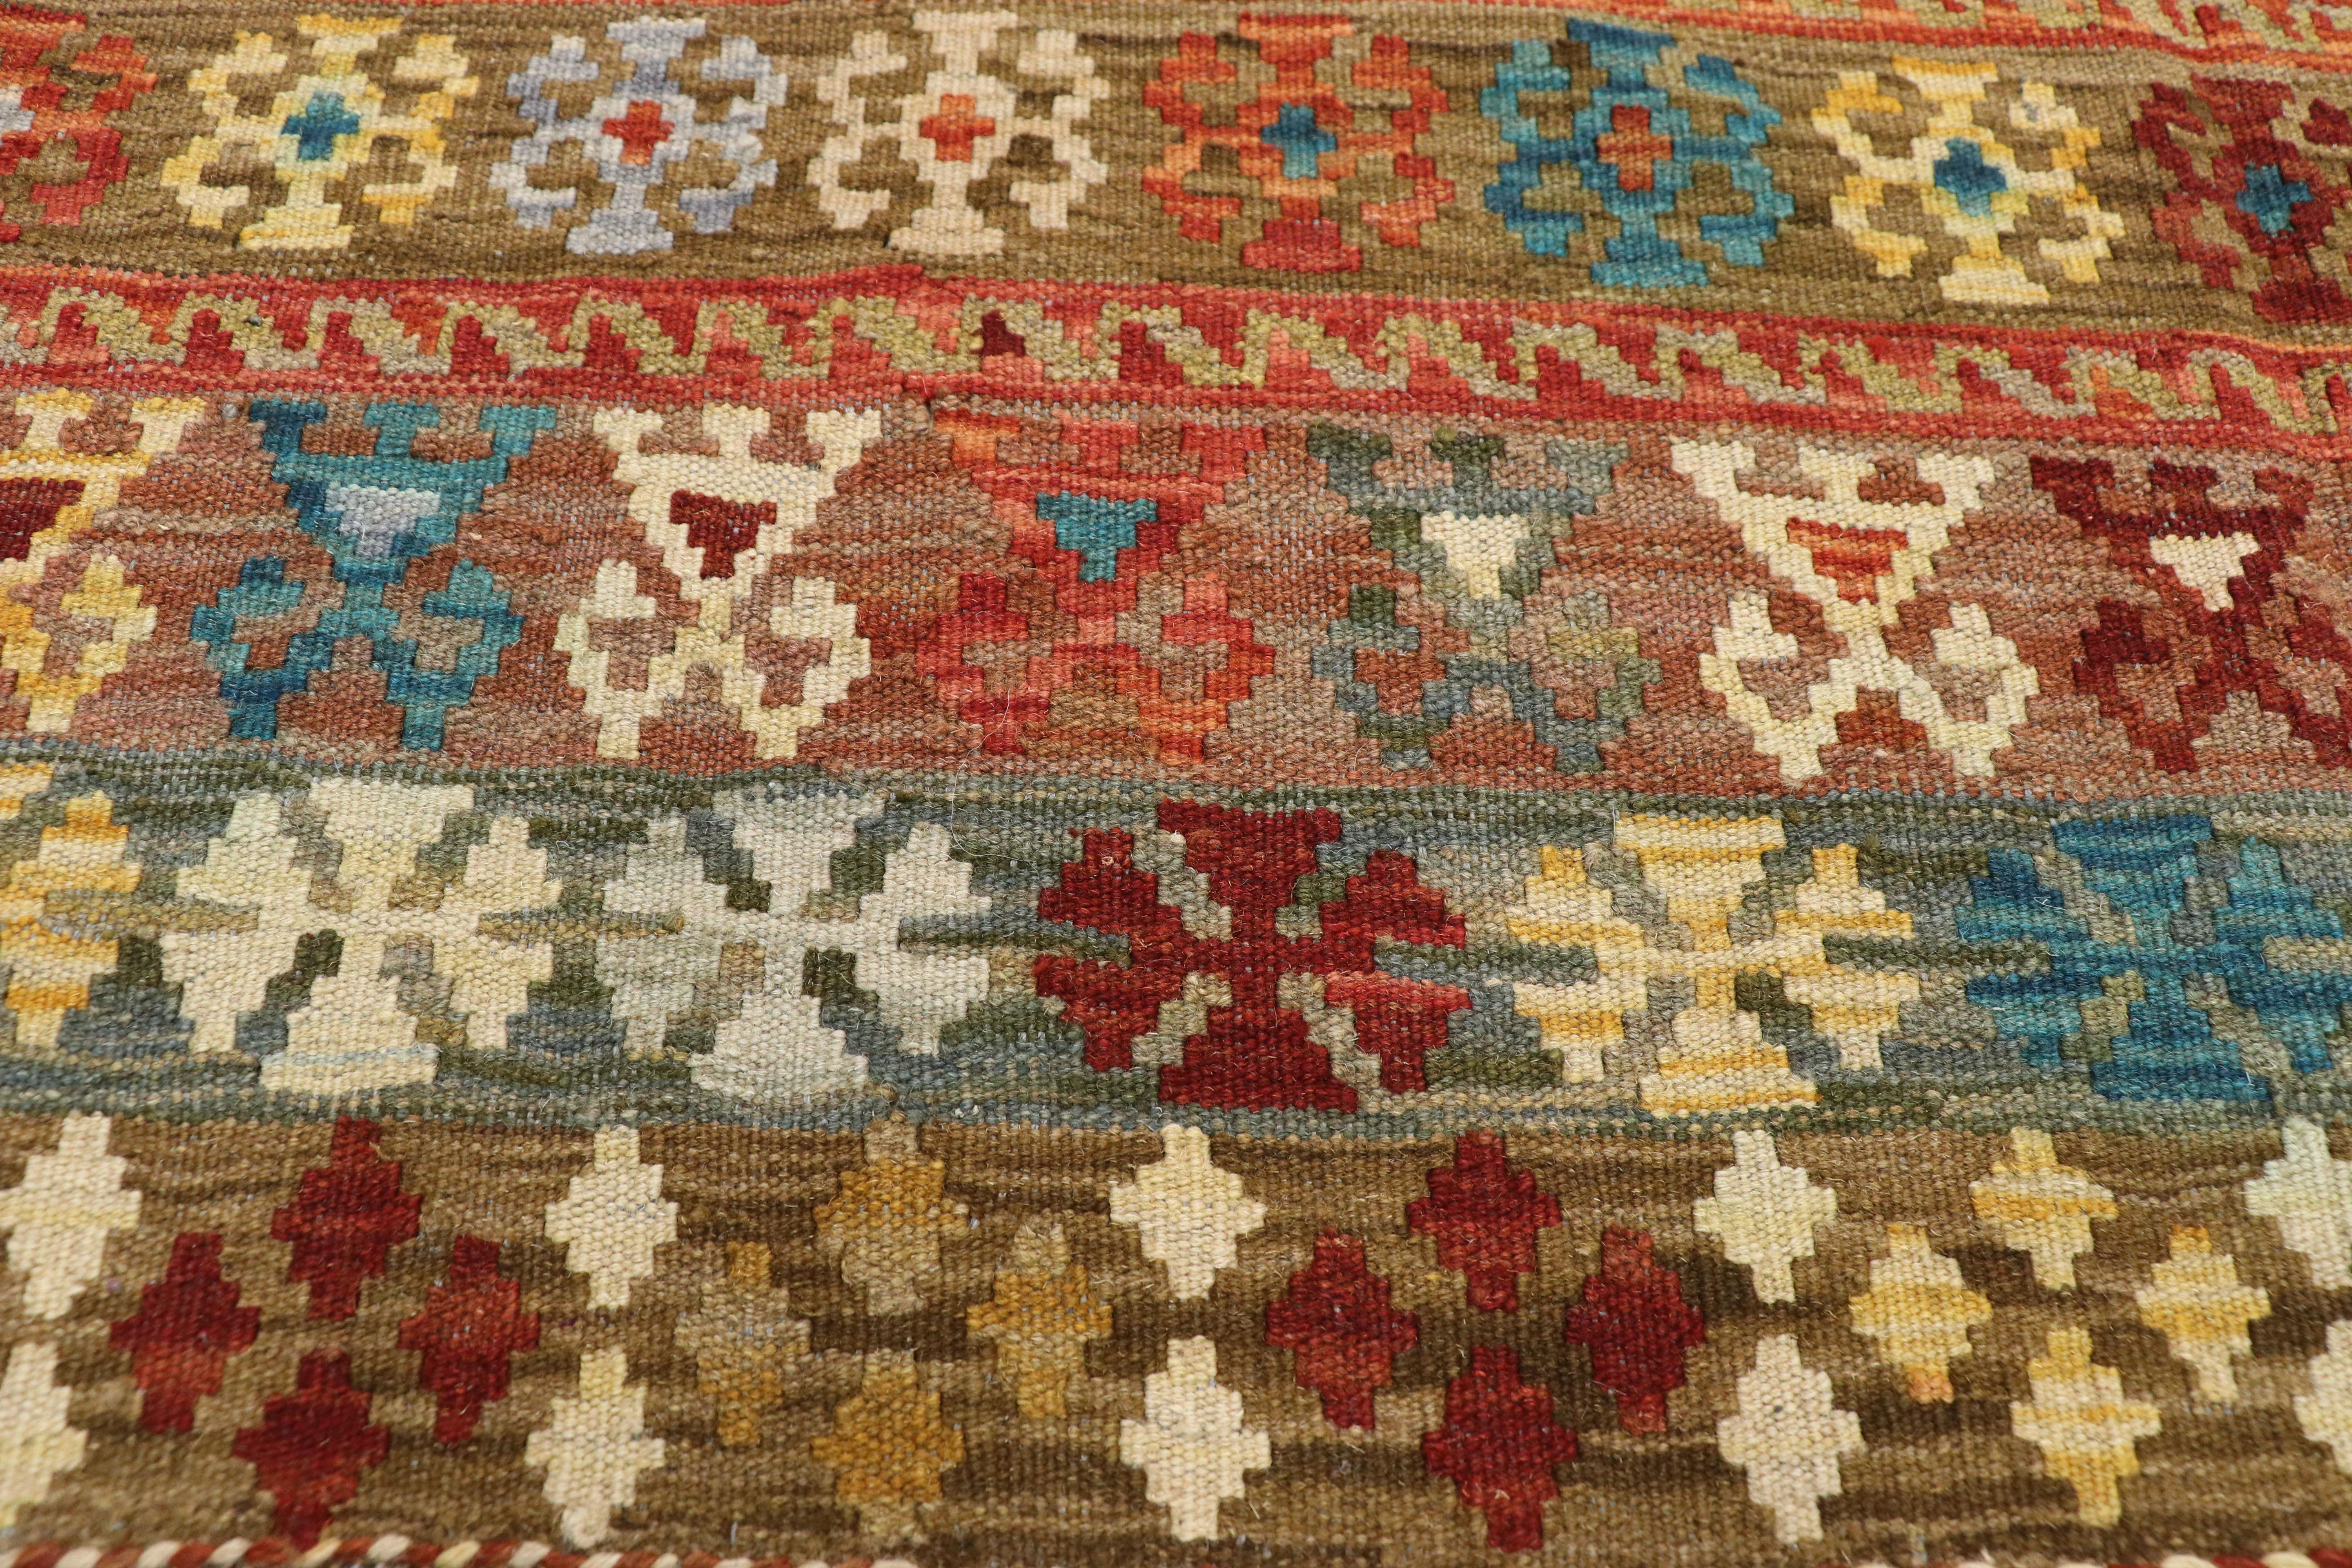 Vintage Afghan Kilim Rug, Southwest Desert Chic Meets Contemporary Santa Fe In Good Condition For Sale In Dallas, TX